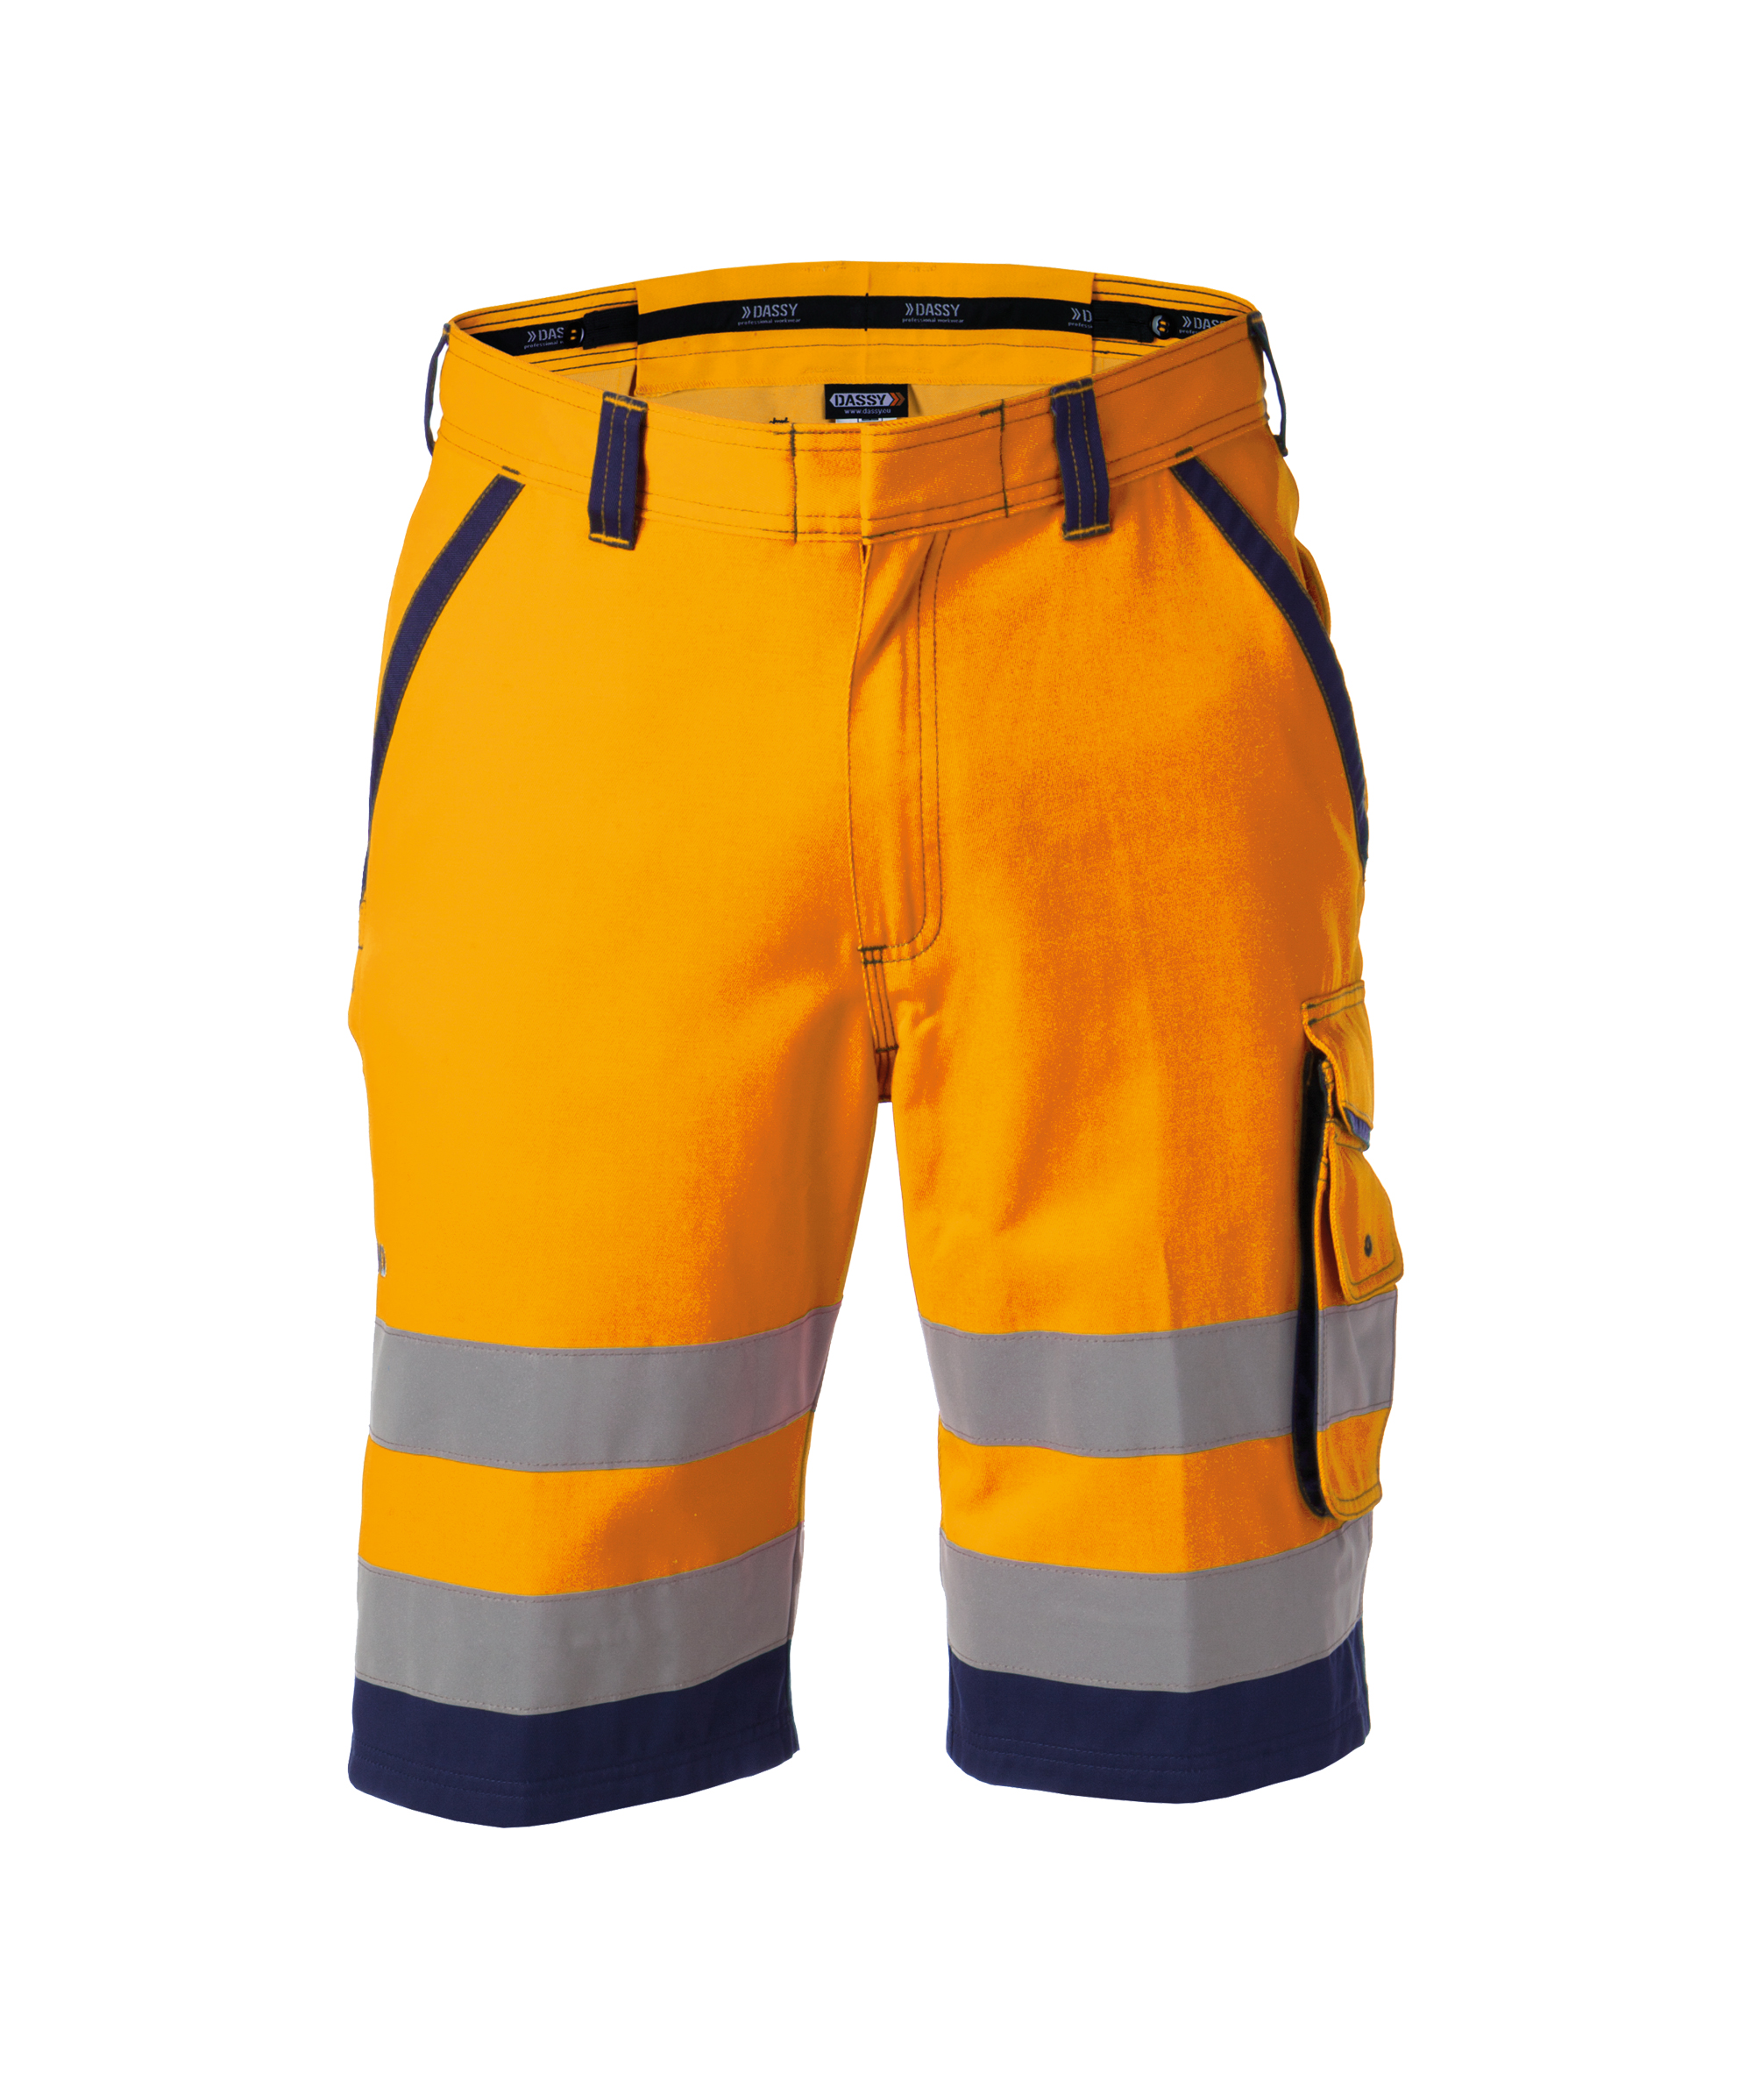 lucca_high-visibility-work-shorts_fluo-orange-navy_front.jpg